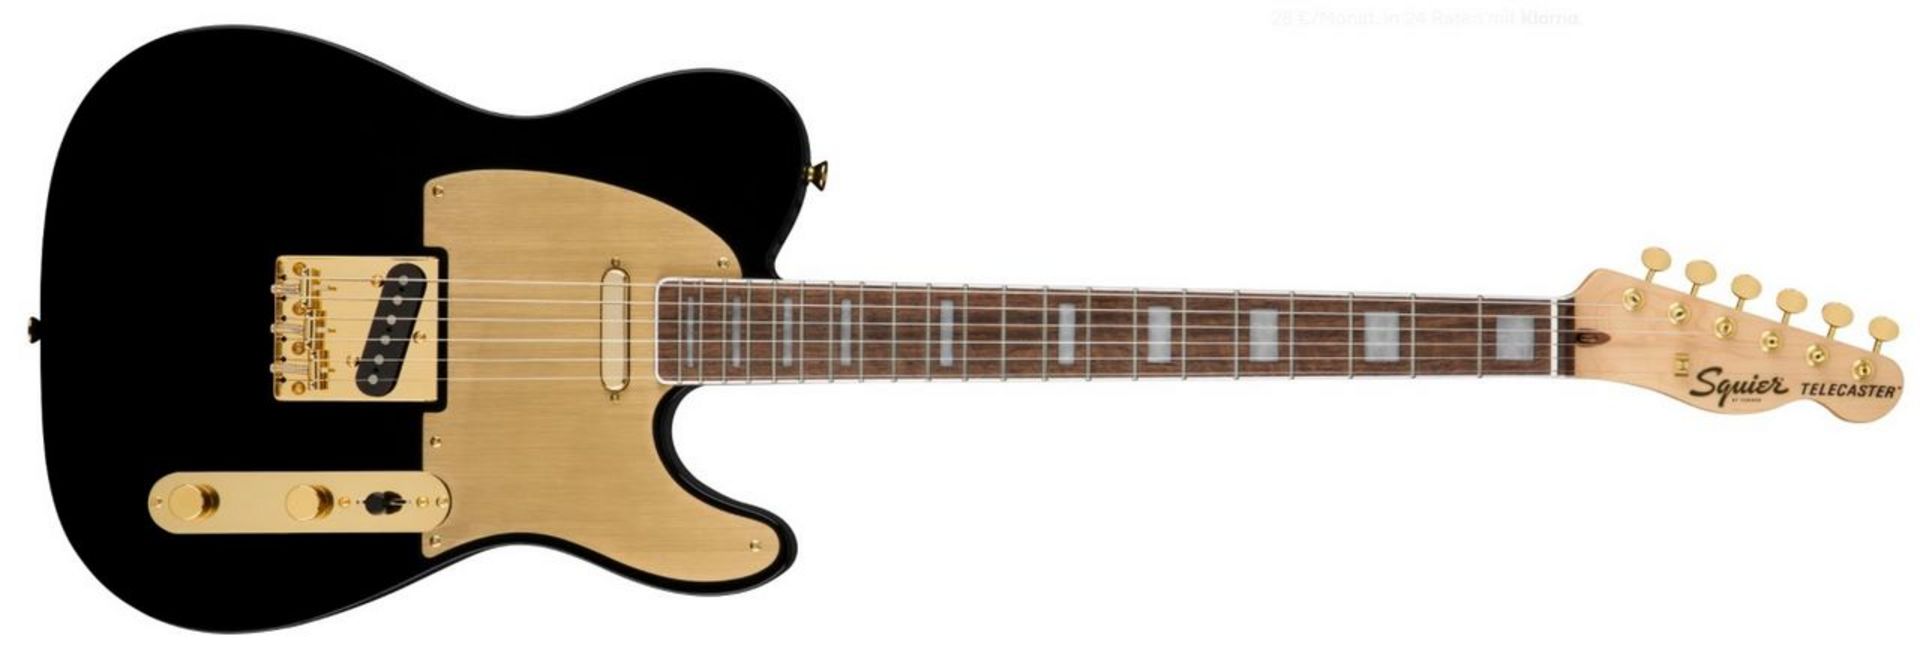 Fender Squier - 40TH ANNIVERSARY TELECASTER GOLD EDITION Black